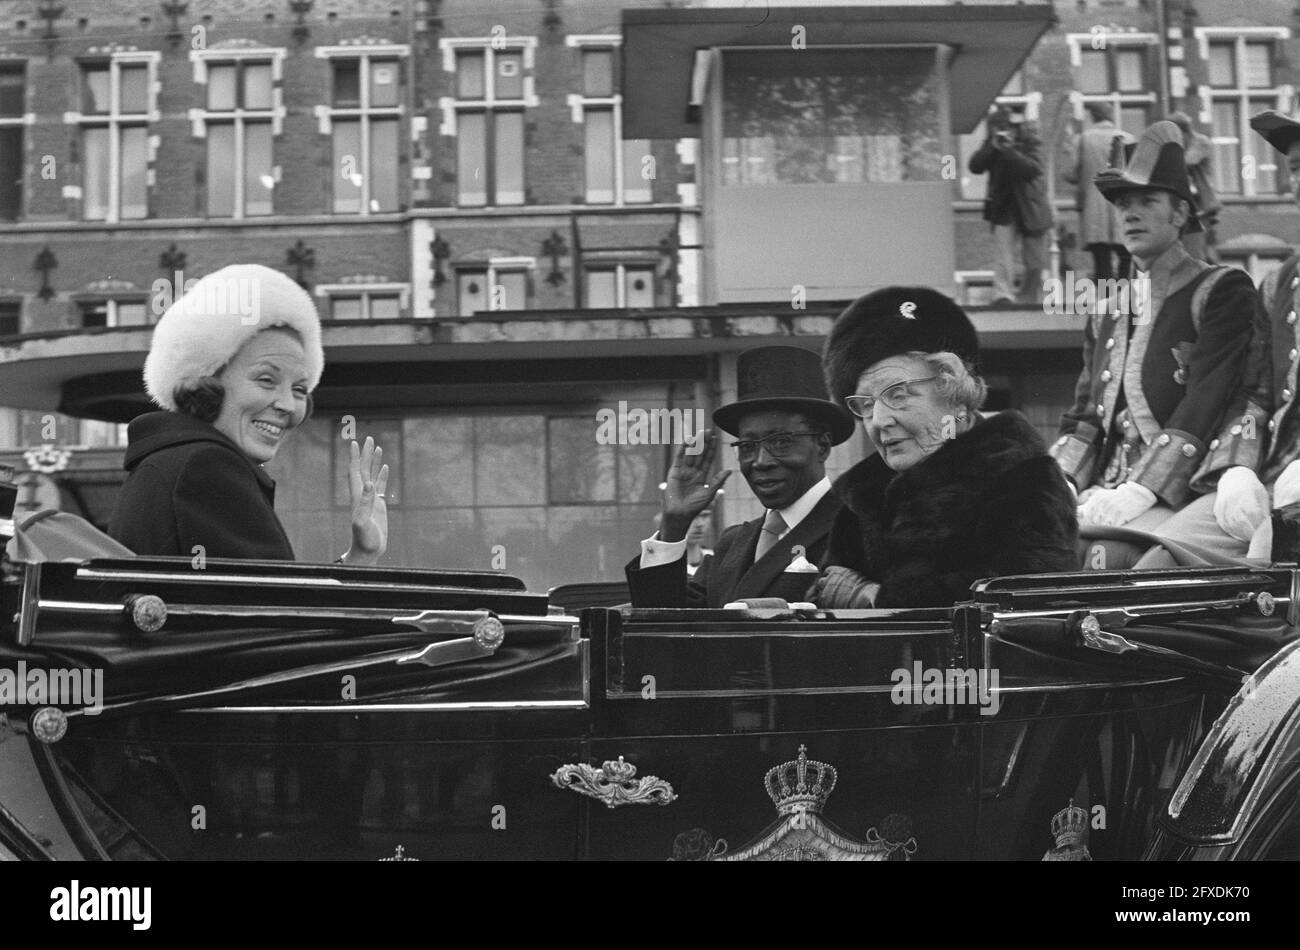 State visit President Senghor of Senegal to the Netherlands arrival at CS in Amsterdam, 22 October 1974, queens, presidents, carriages, state visits, The Netherlands, 20th century press agency photo, news to remember, documentary, historic photography 1945-1990, visual stories, human history of the Twentieth Century, capturing moments in time Stock Photo